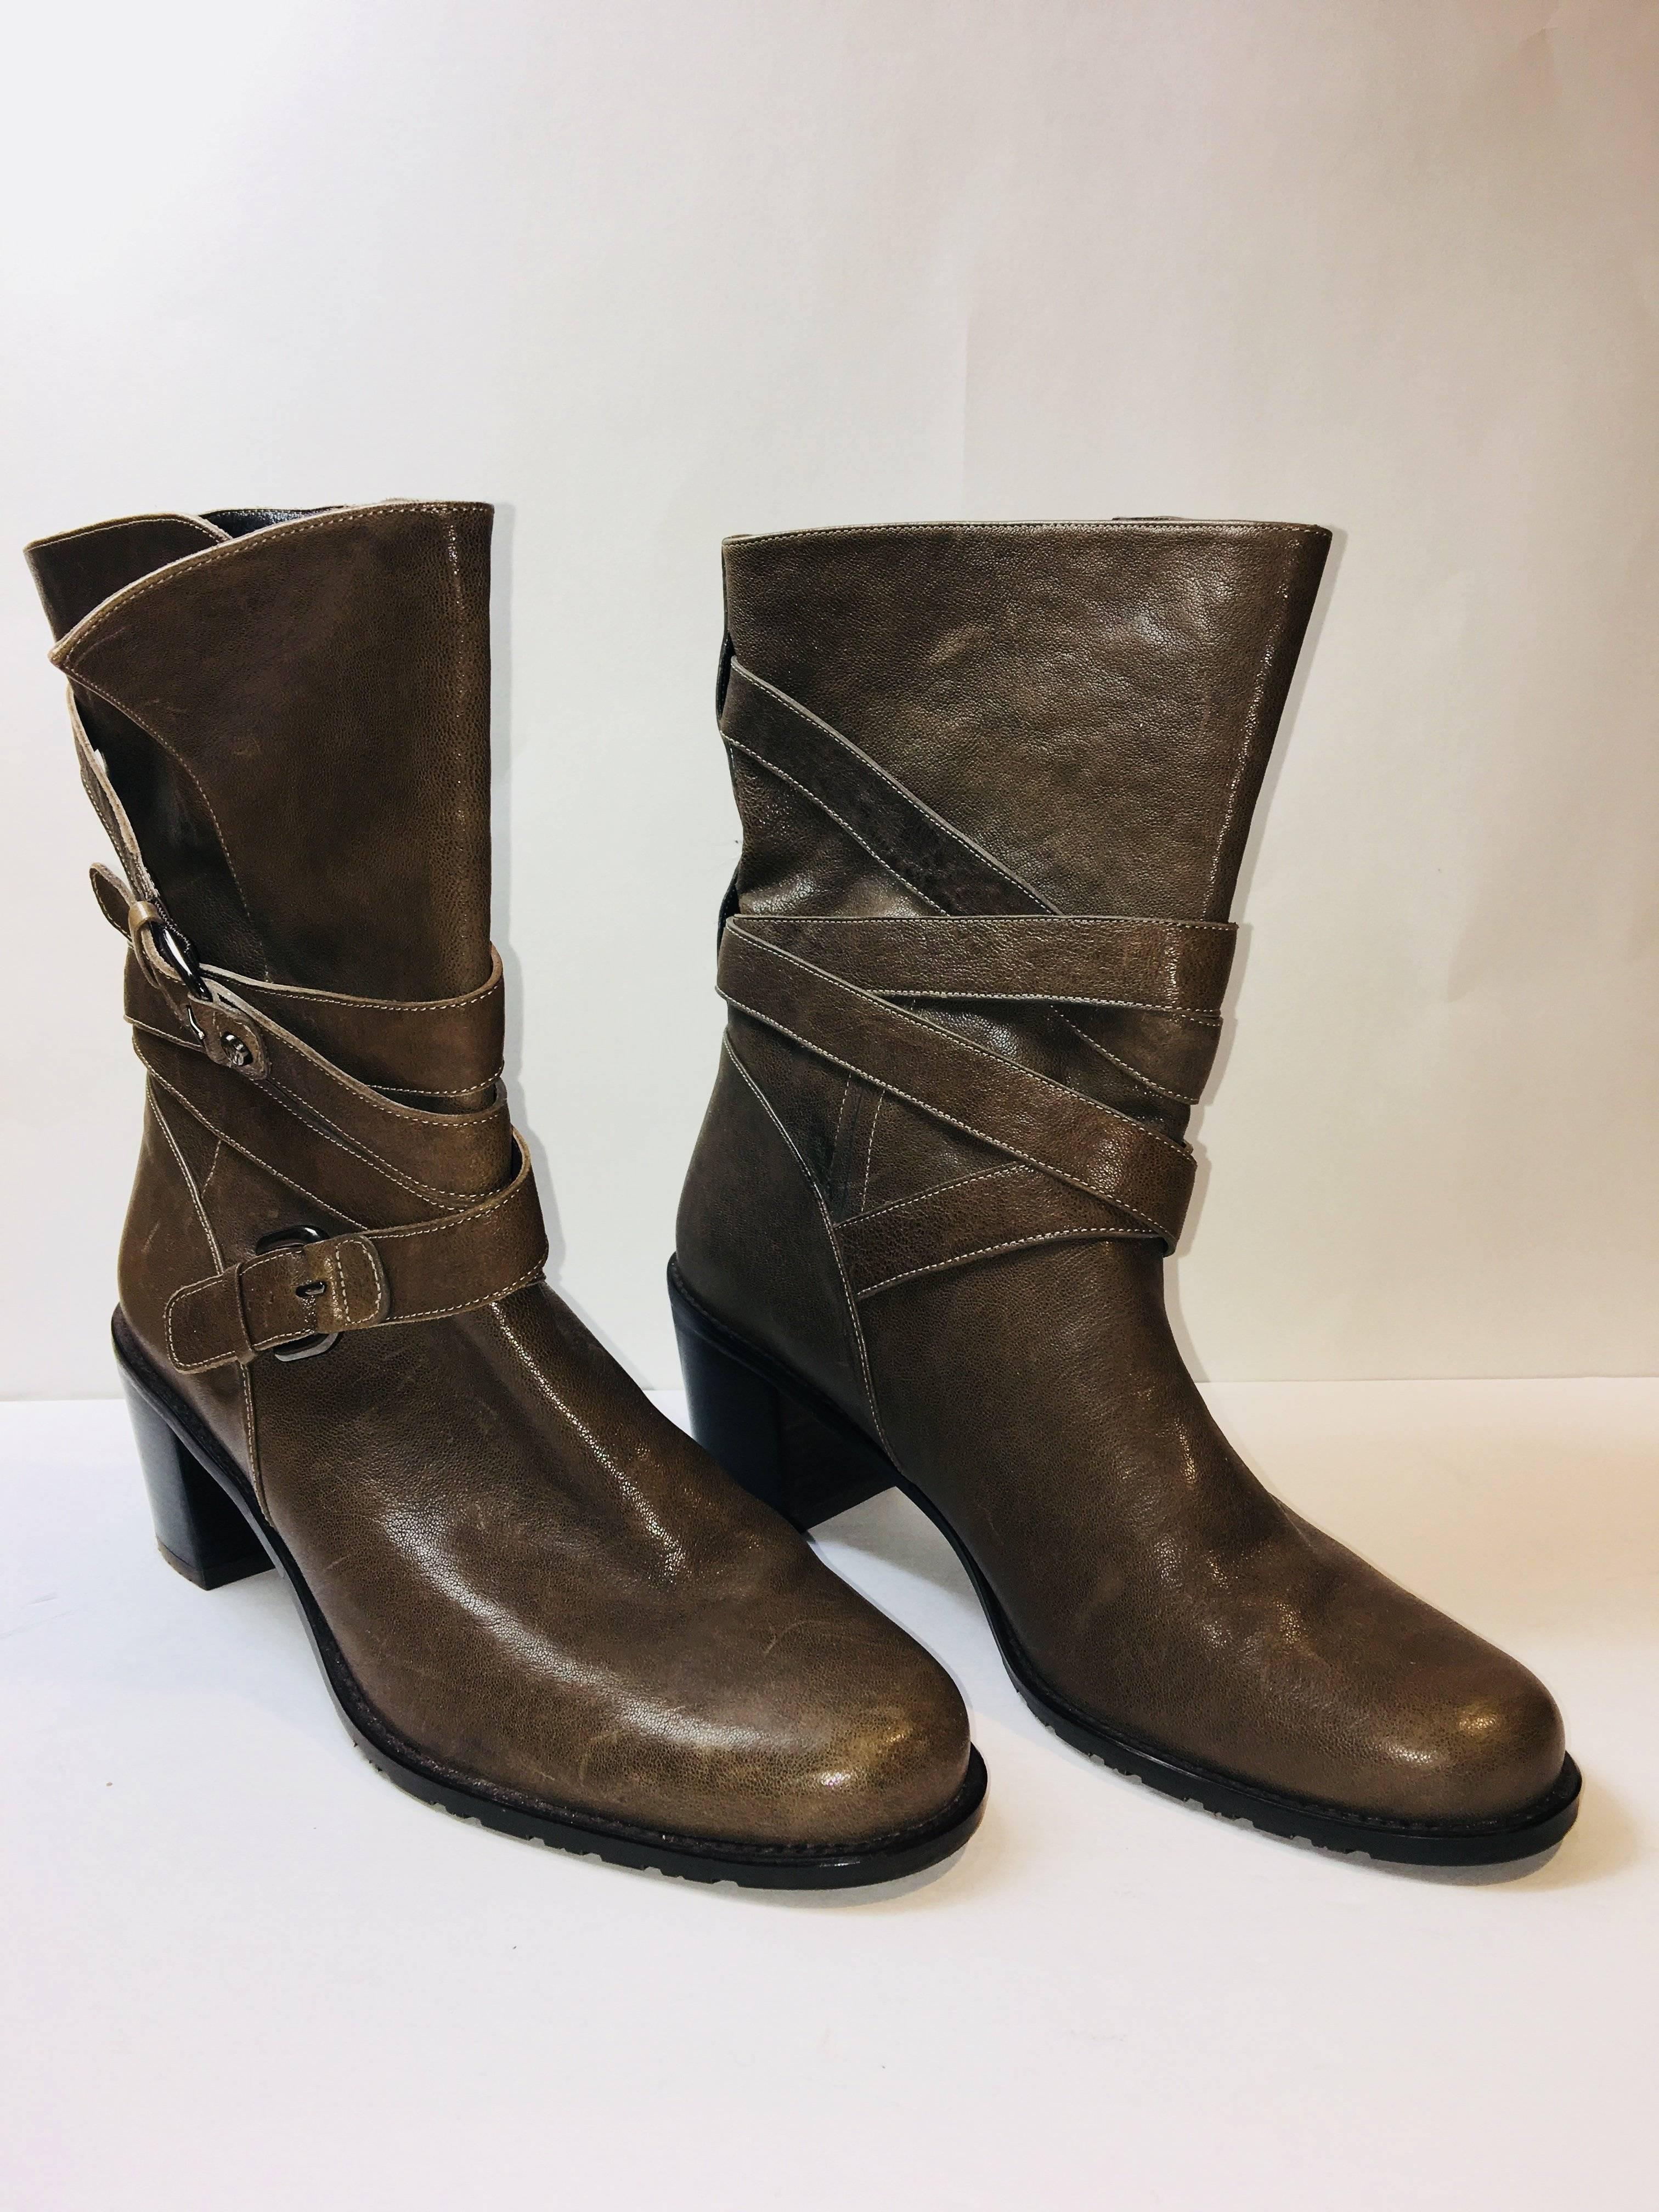 Stuart Weitzman Mid Calf Boots in Brown Leather with Wrap Around Buckles